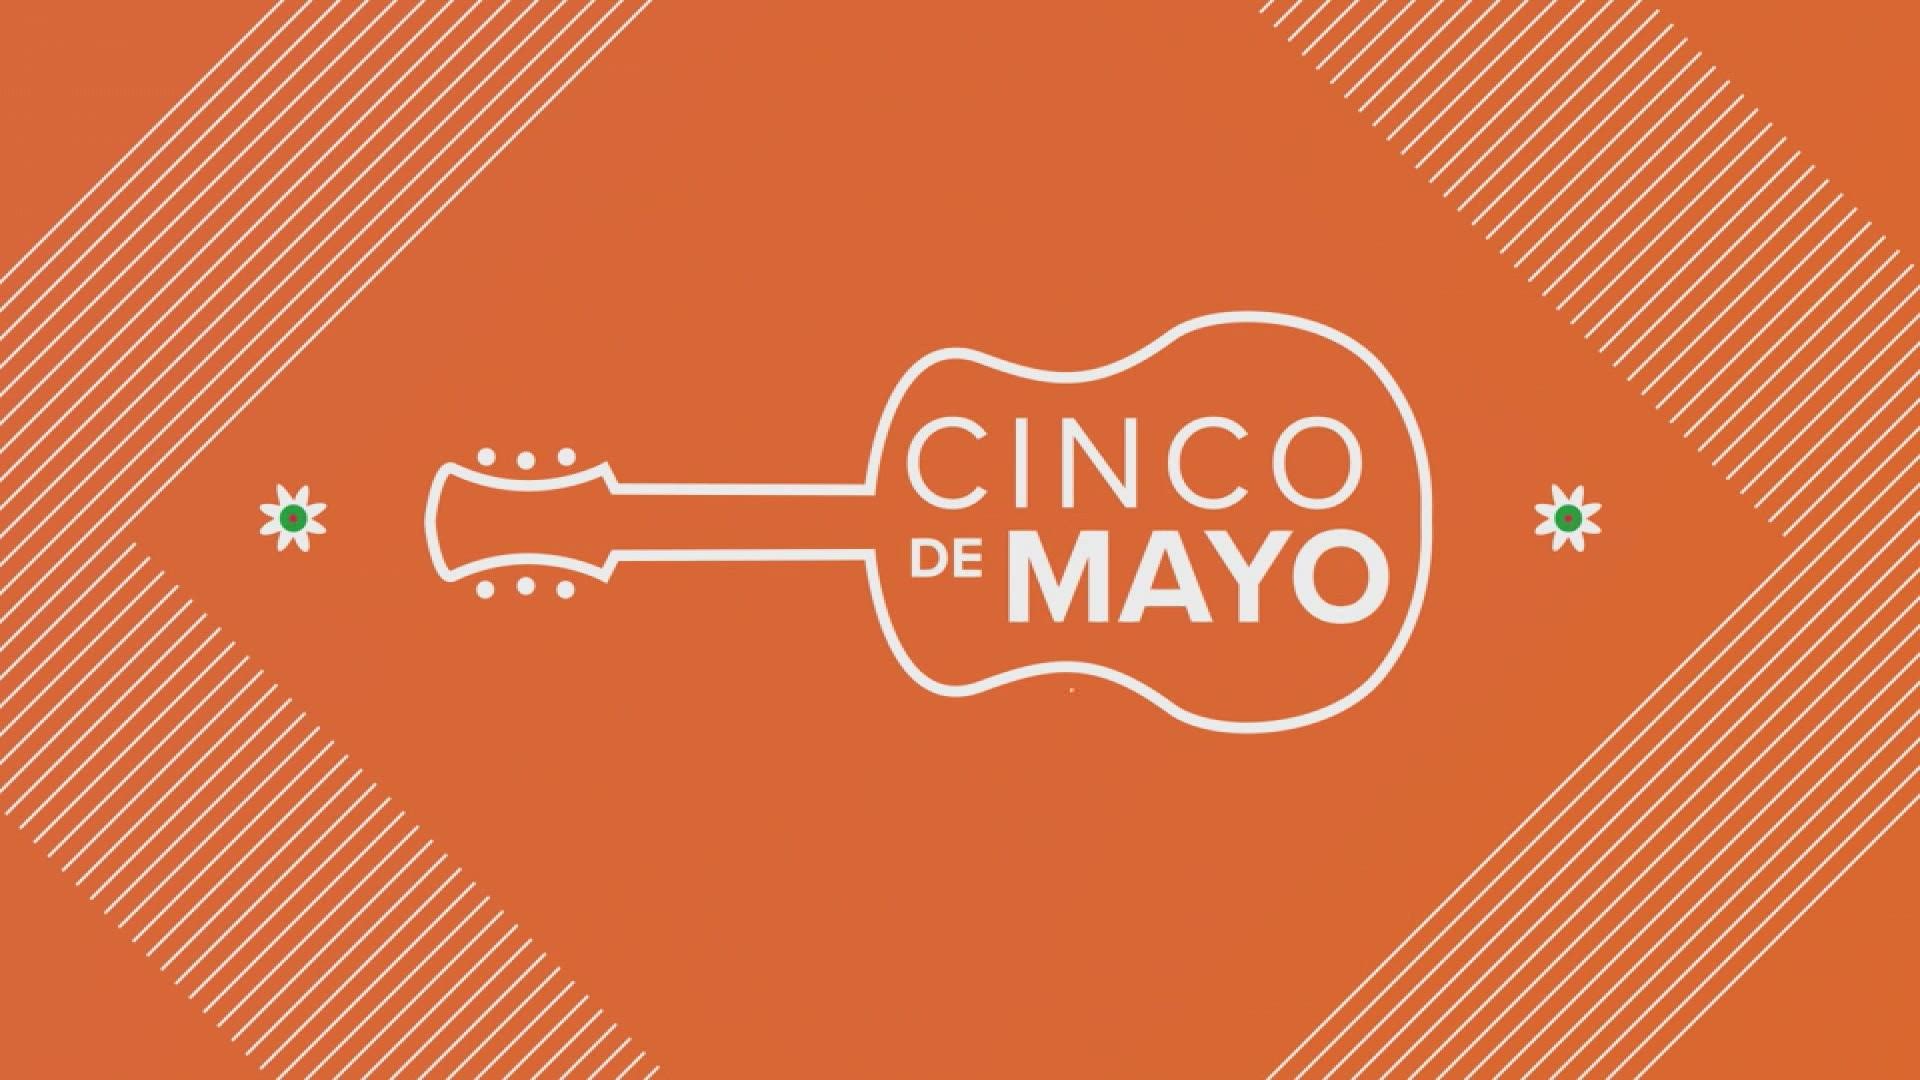 Cinco De Mayo is a holiday celebrated in Mexico to honor the victory of Mexican forces over Napoleon III